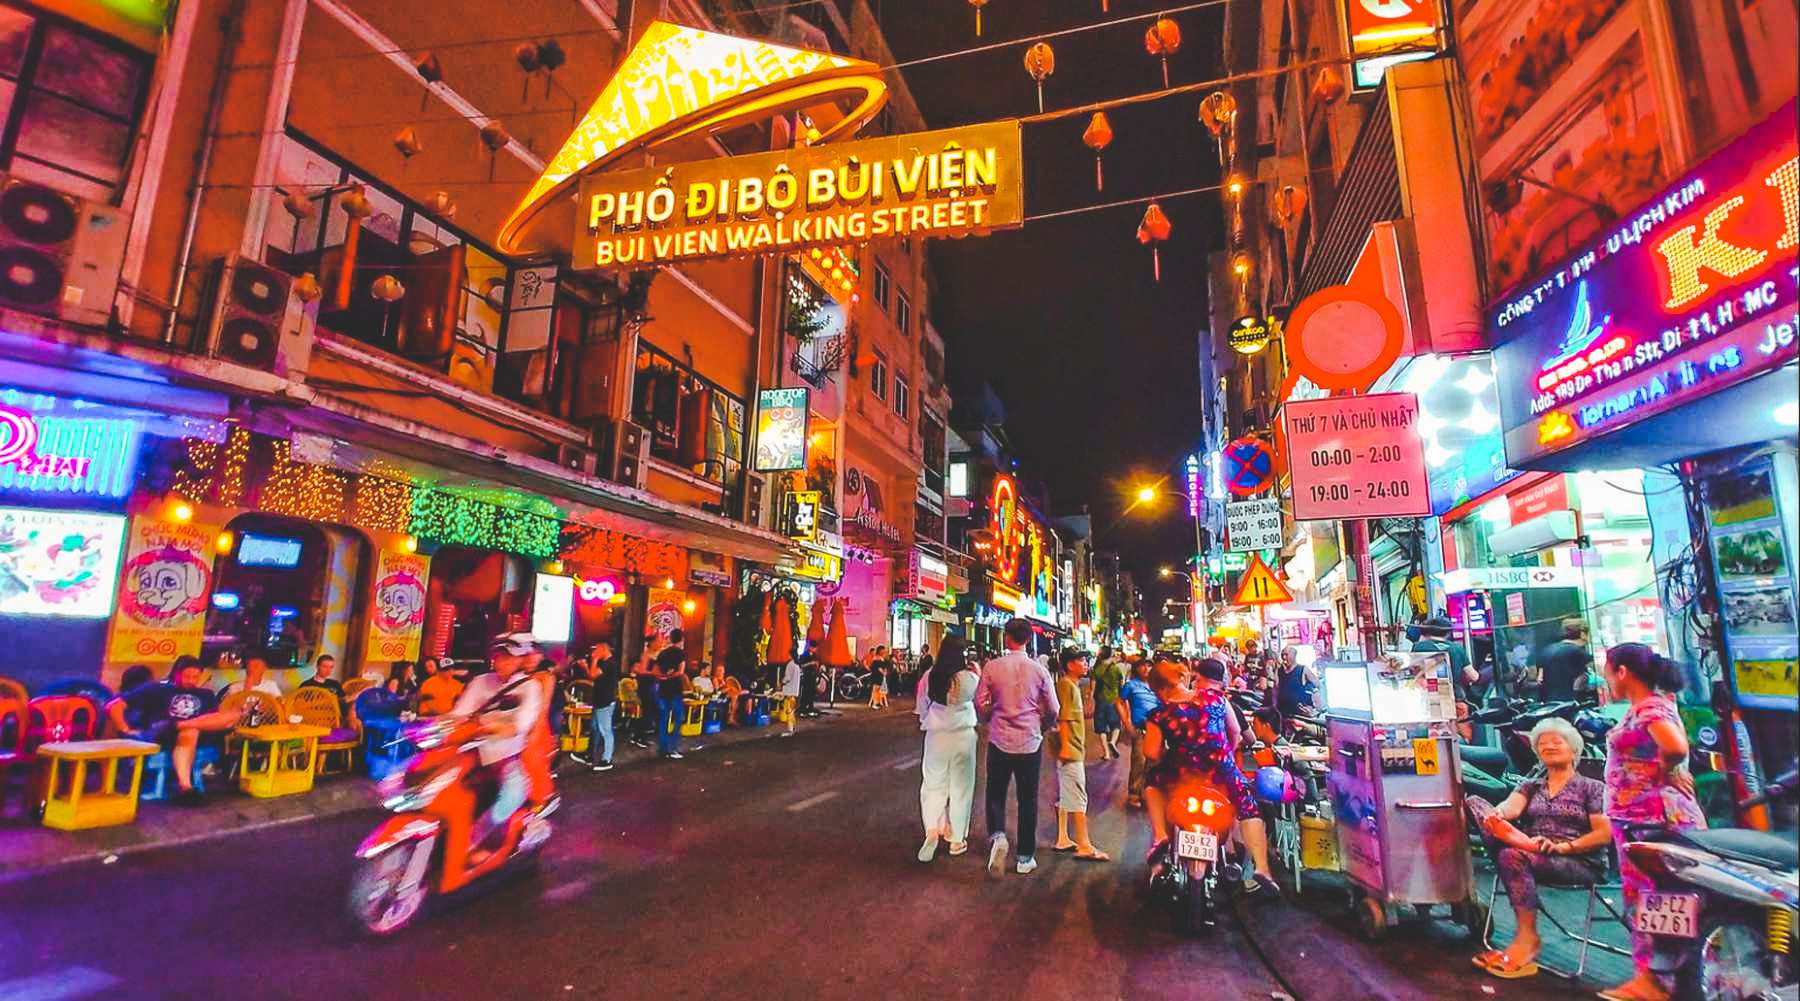 Bui Vien street - A guide to the backpacker street of Ho Chi Minh City